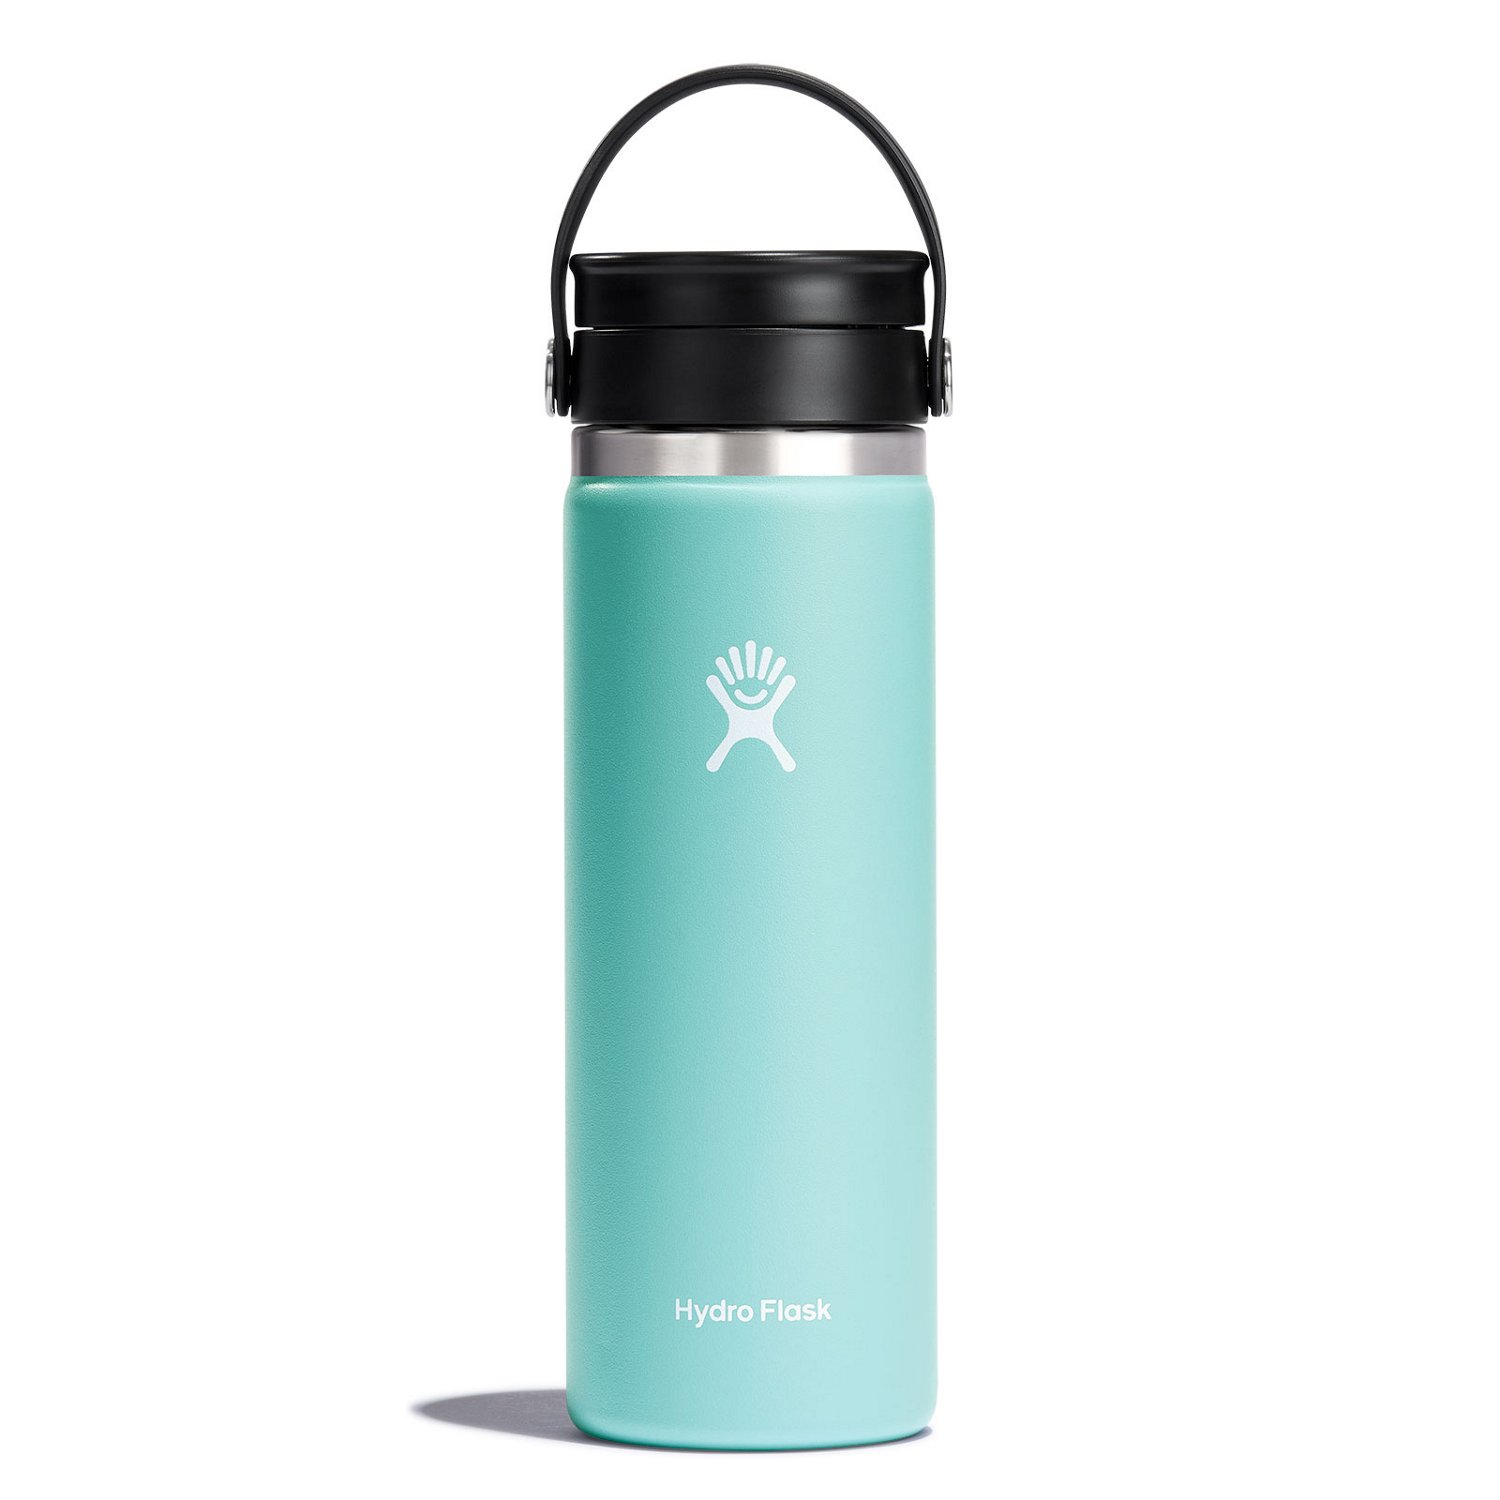 https://academy.scene7.com/is/image/academy///camping/drinkware/blue_hydro-flask-20-oz-coffee-wide-mouth-bottle-with-flex-sip-lid-_w20bcx441/c139fa37166649d28ef89e9386dfb621